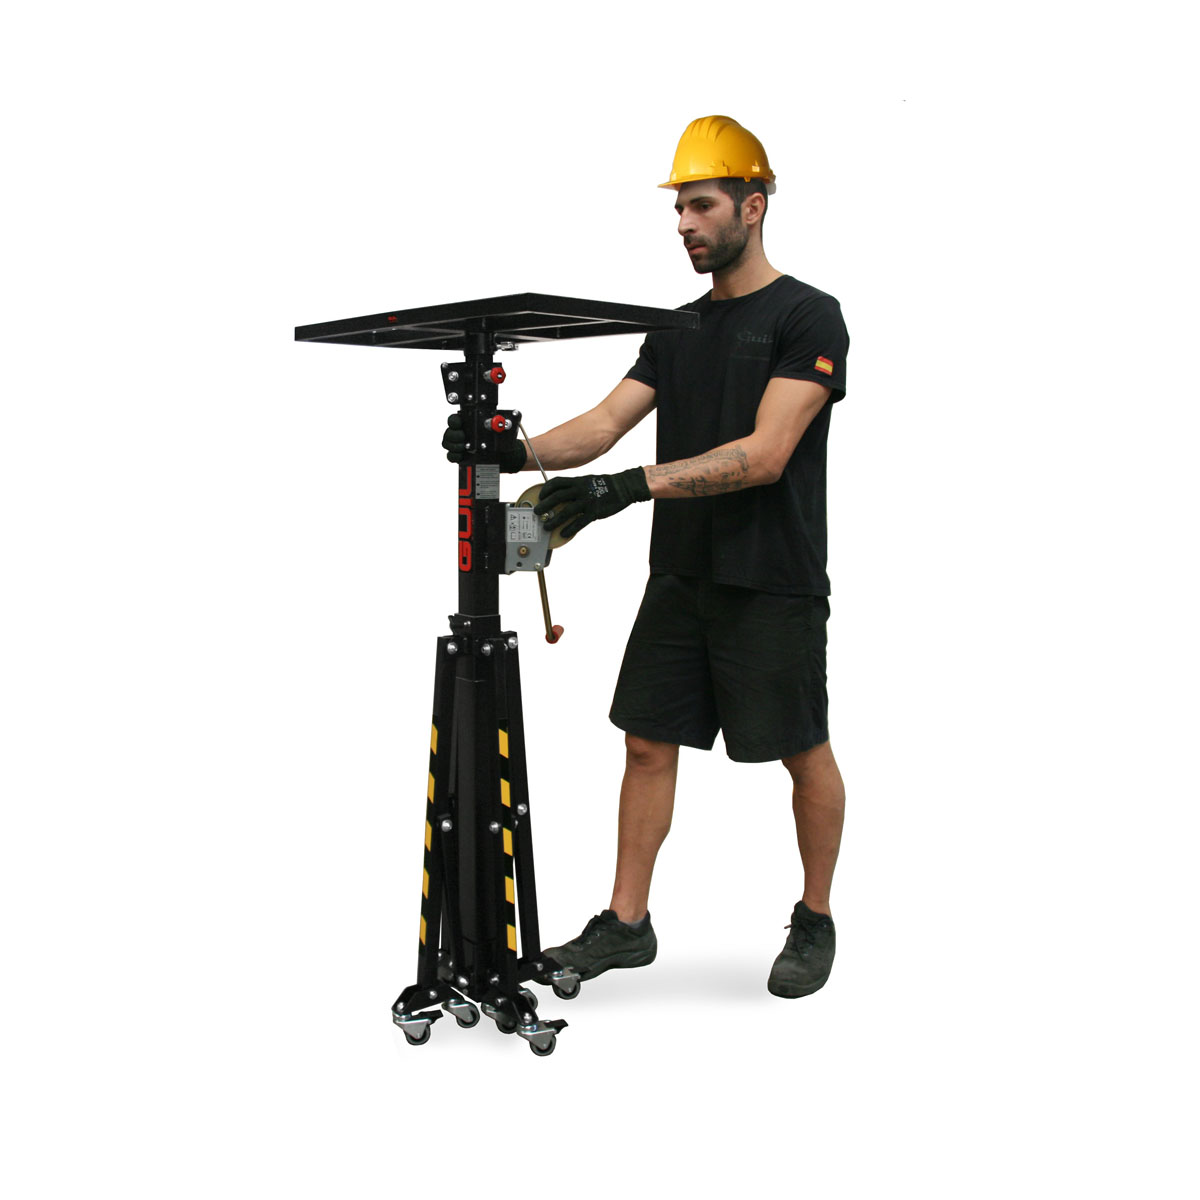 Construction Material Lifter